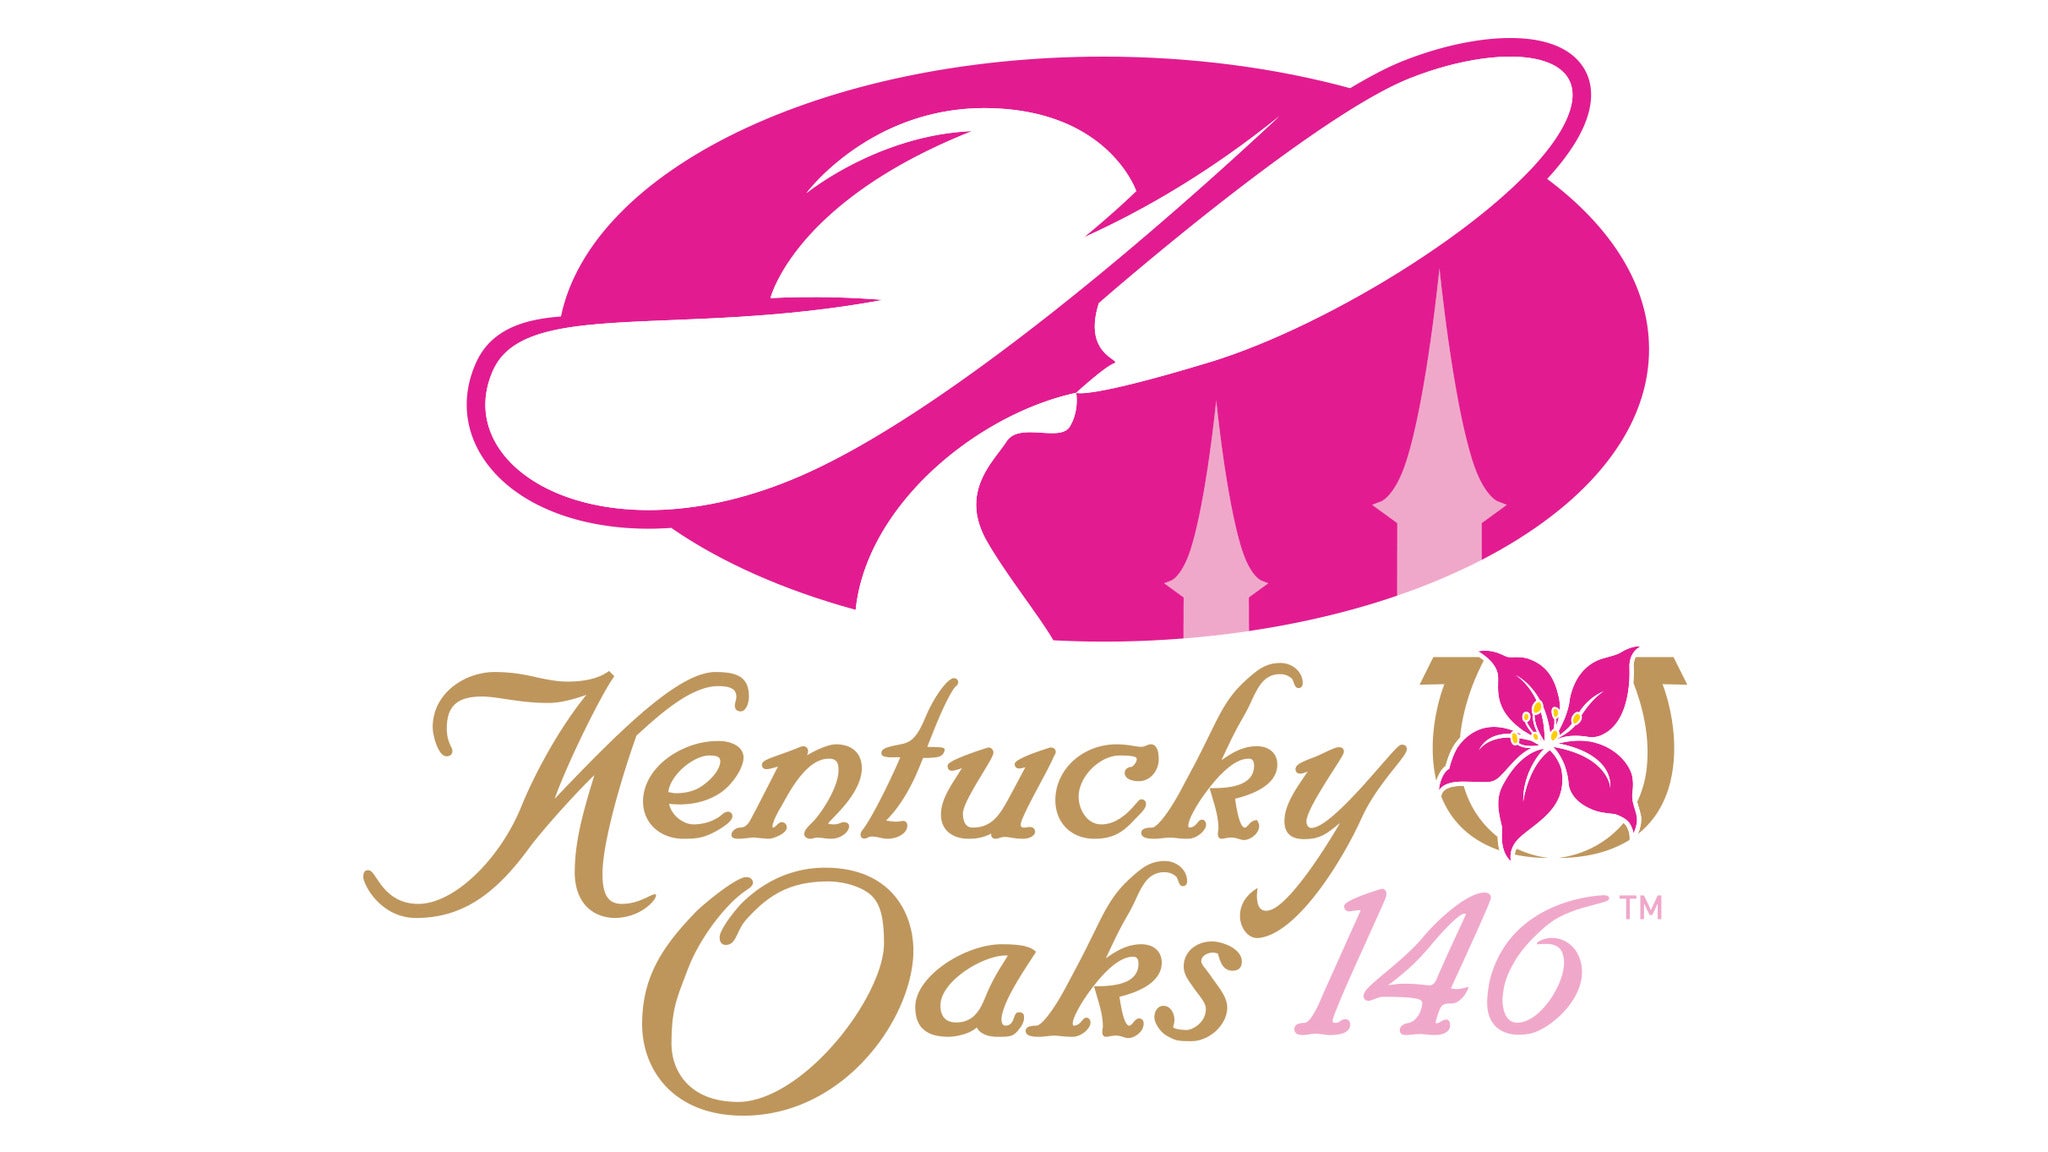 146th Kentucky Oaks - Infield & Paddock General Admission Single Day in Louisville promo photo for Advance Purchase Pricing presale offer code